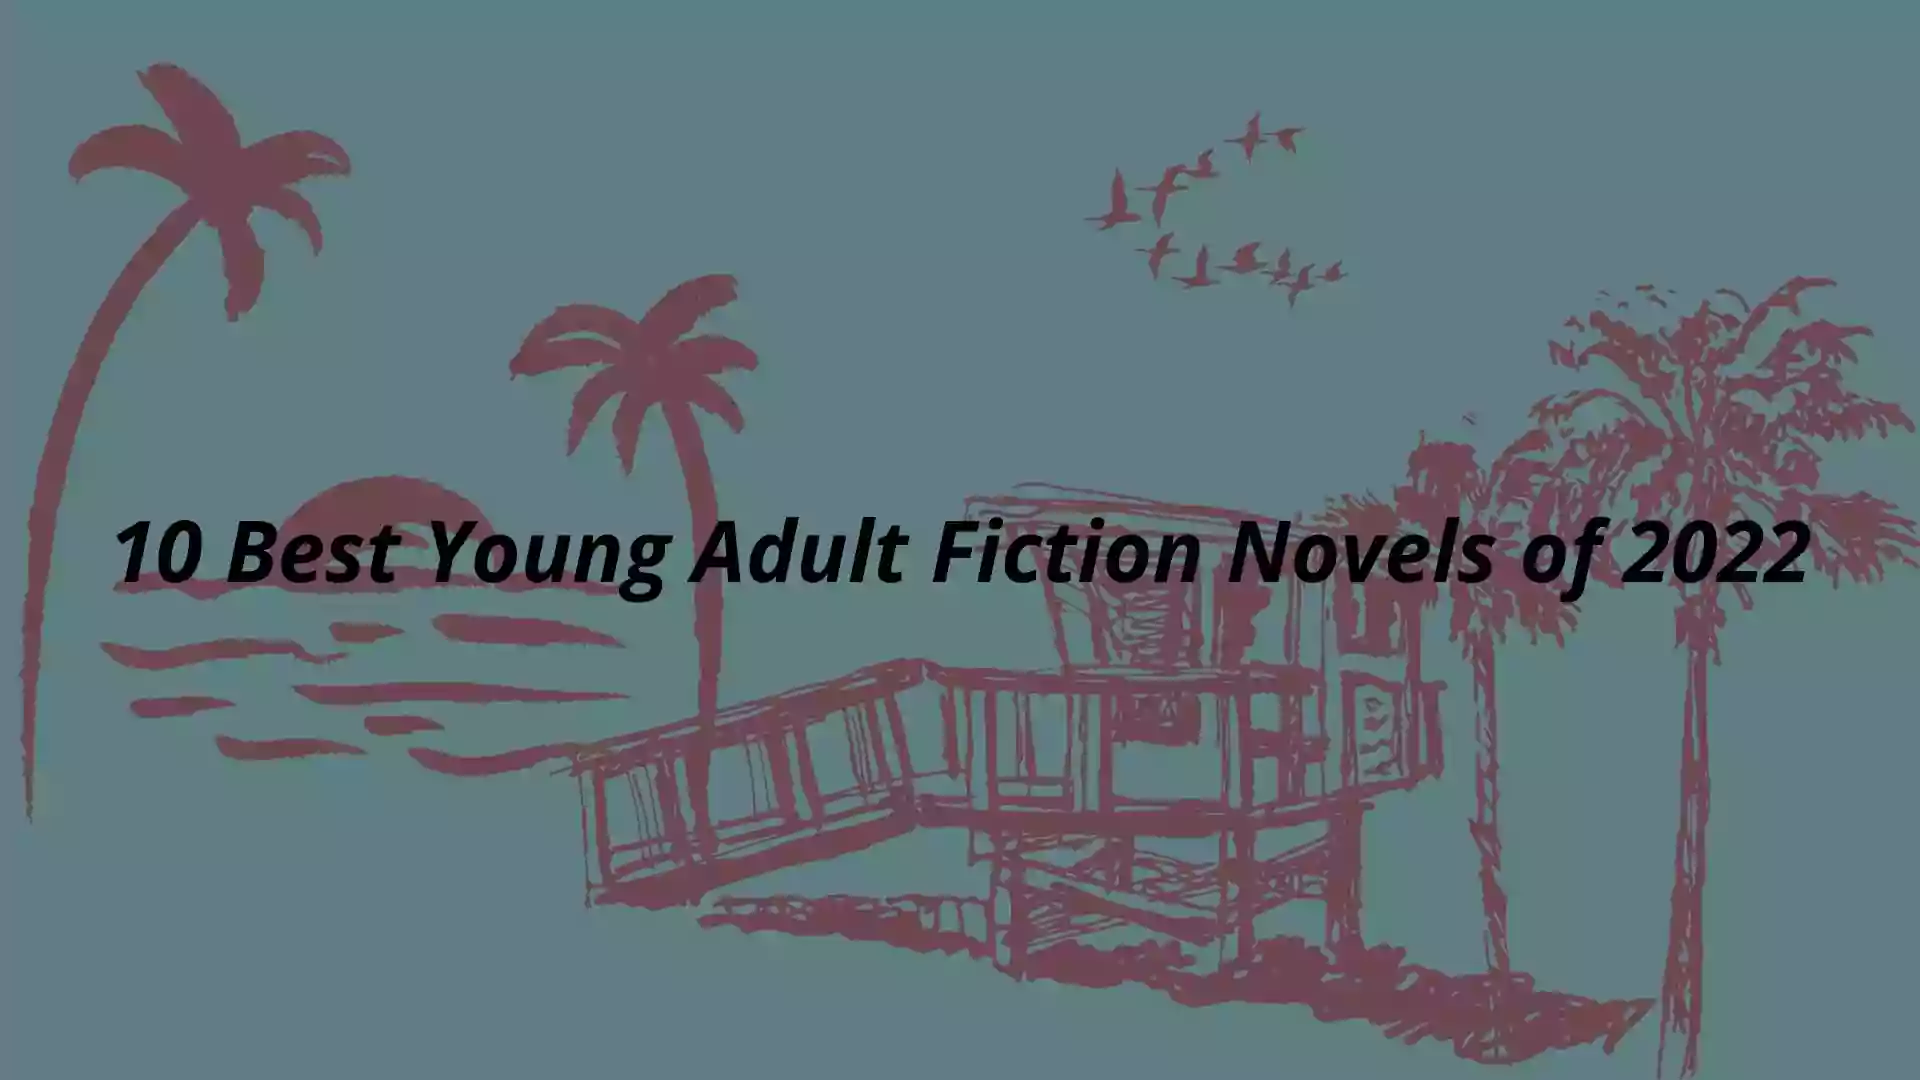 10 Best Young Adult Fiction Novels of 2022